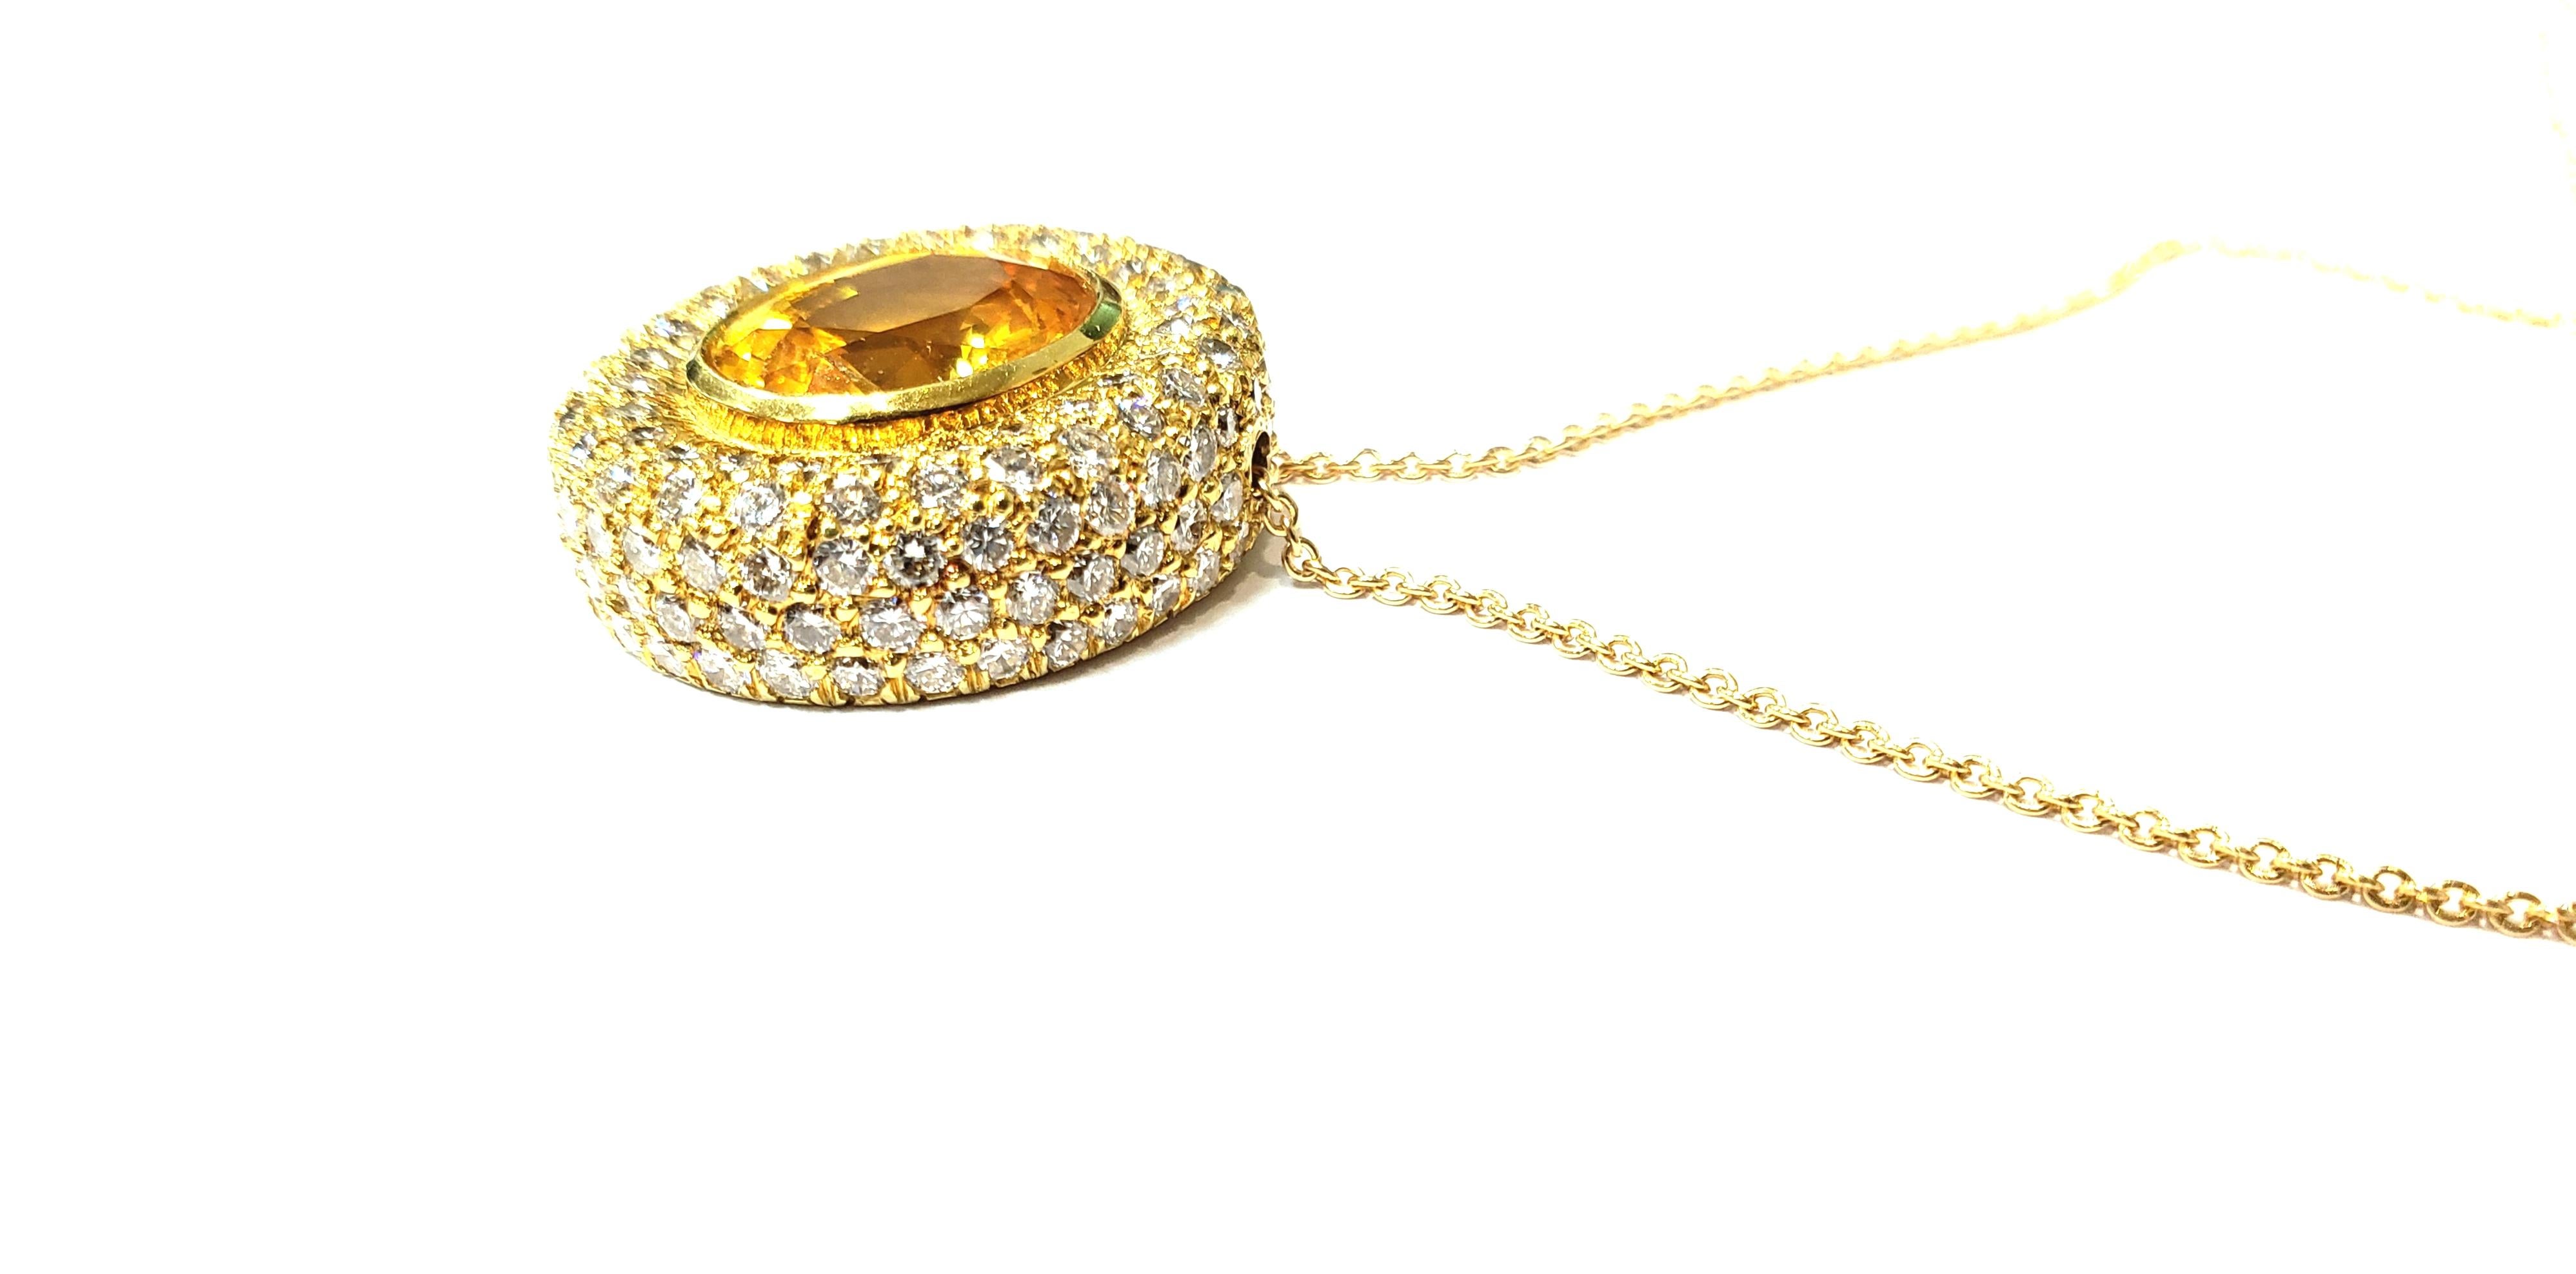 Women's Handmade 18 Karat Yellow Gold and Diamond Pendant with a Center Yellow Sapphire For Sale